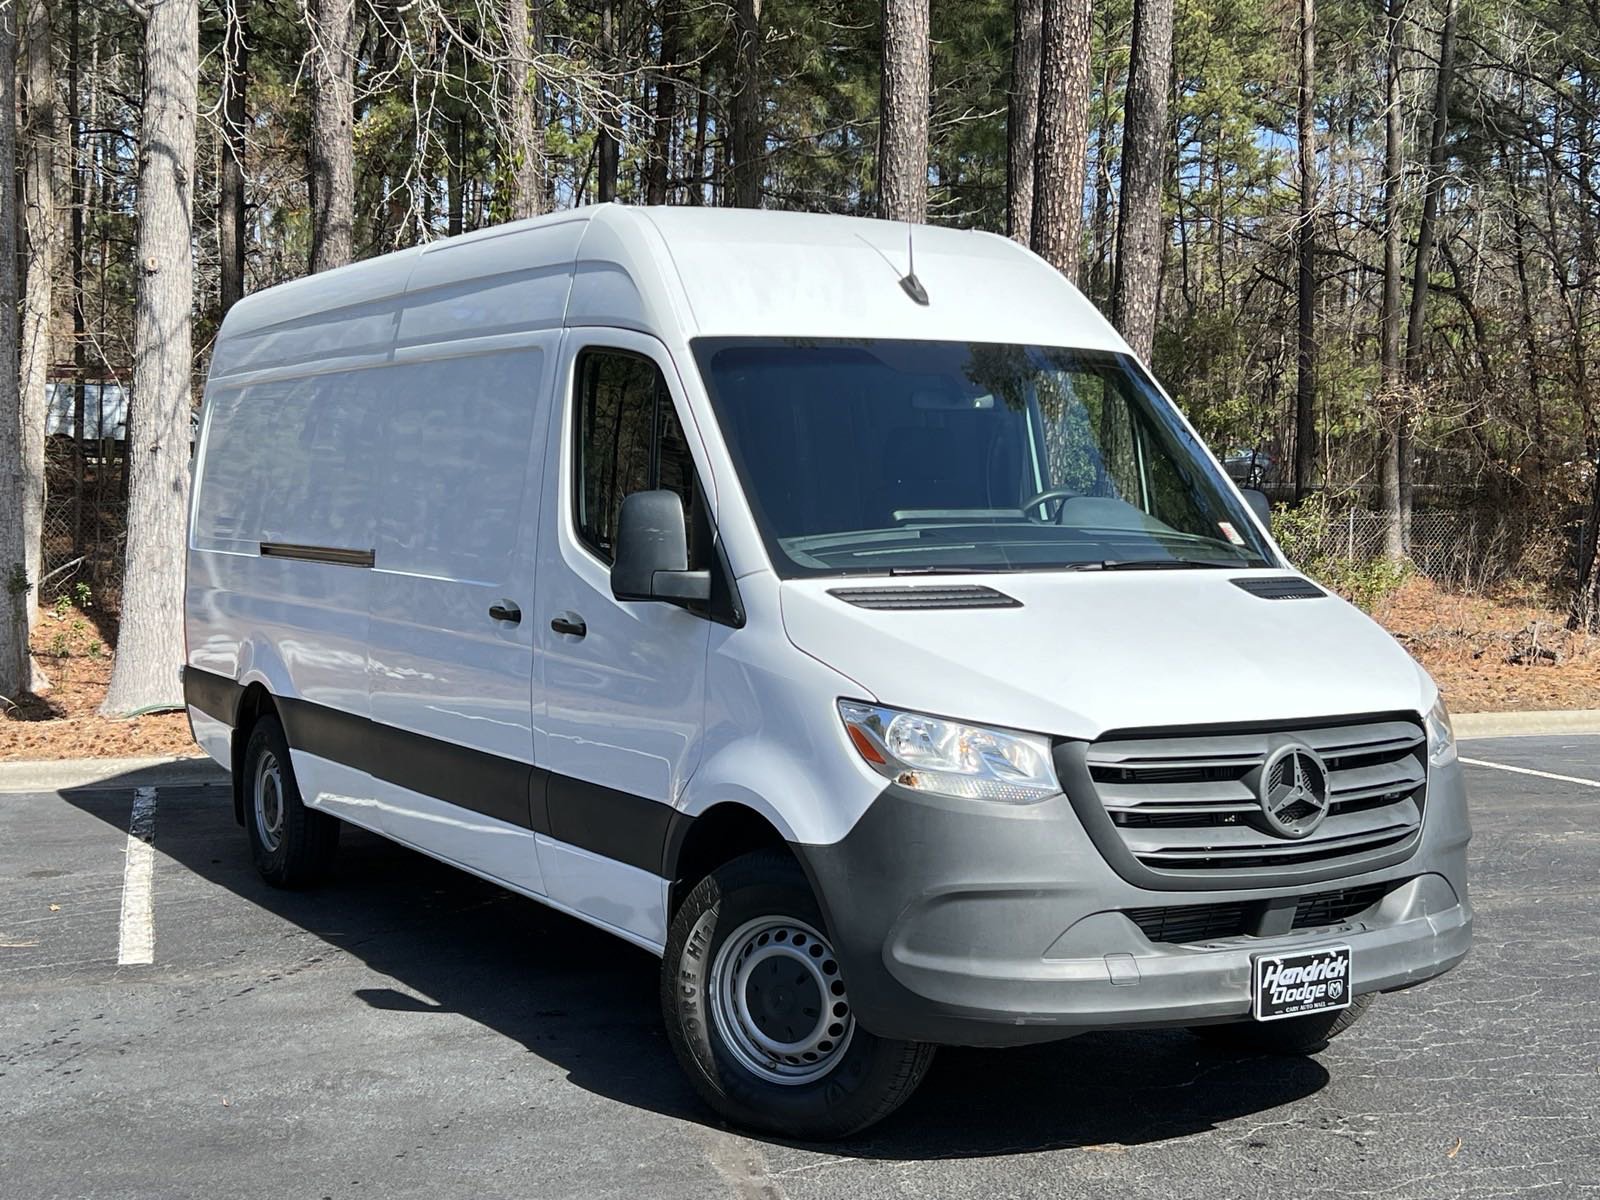 Pre-Owned 2020 Mercedes-Benz Sprinter Cargo Van 2500 High Roof V6 170 RWD  Van in Cary #SA37050 | Hendrick Buick GMC Cary